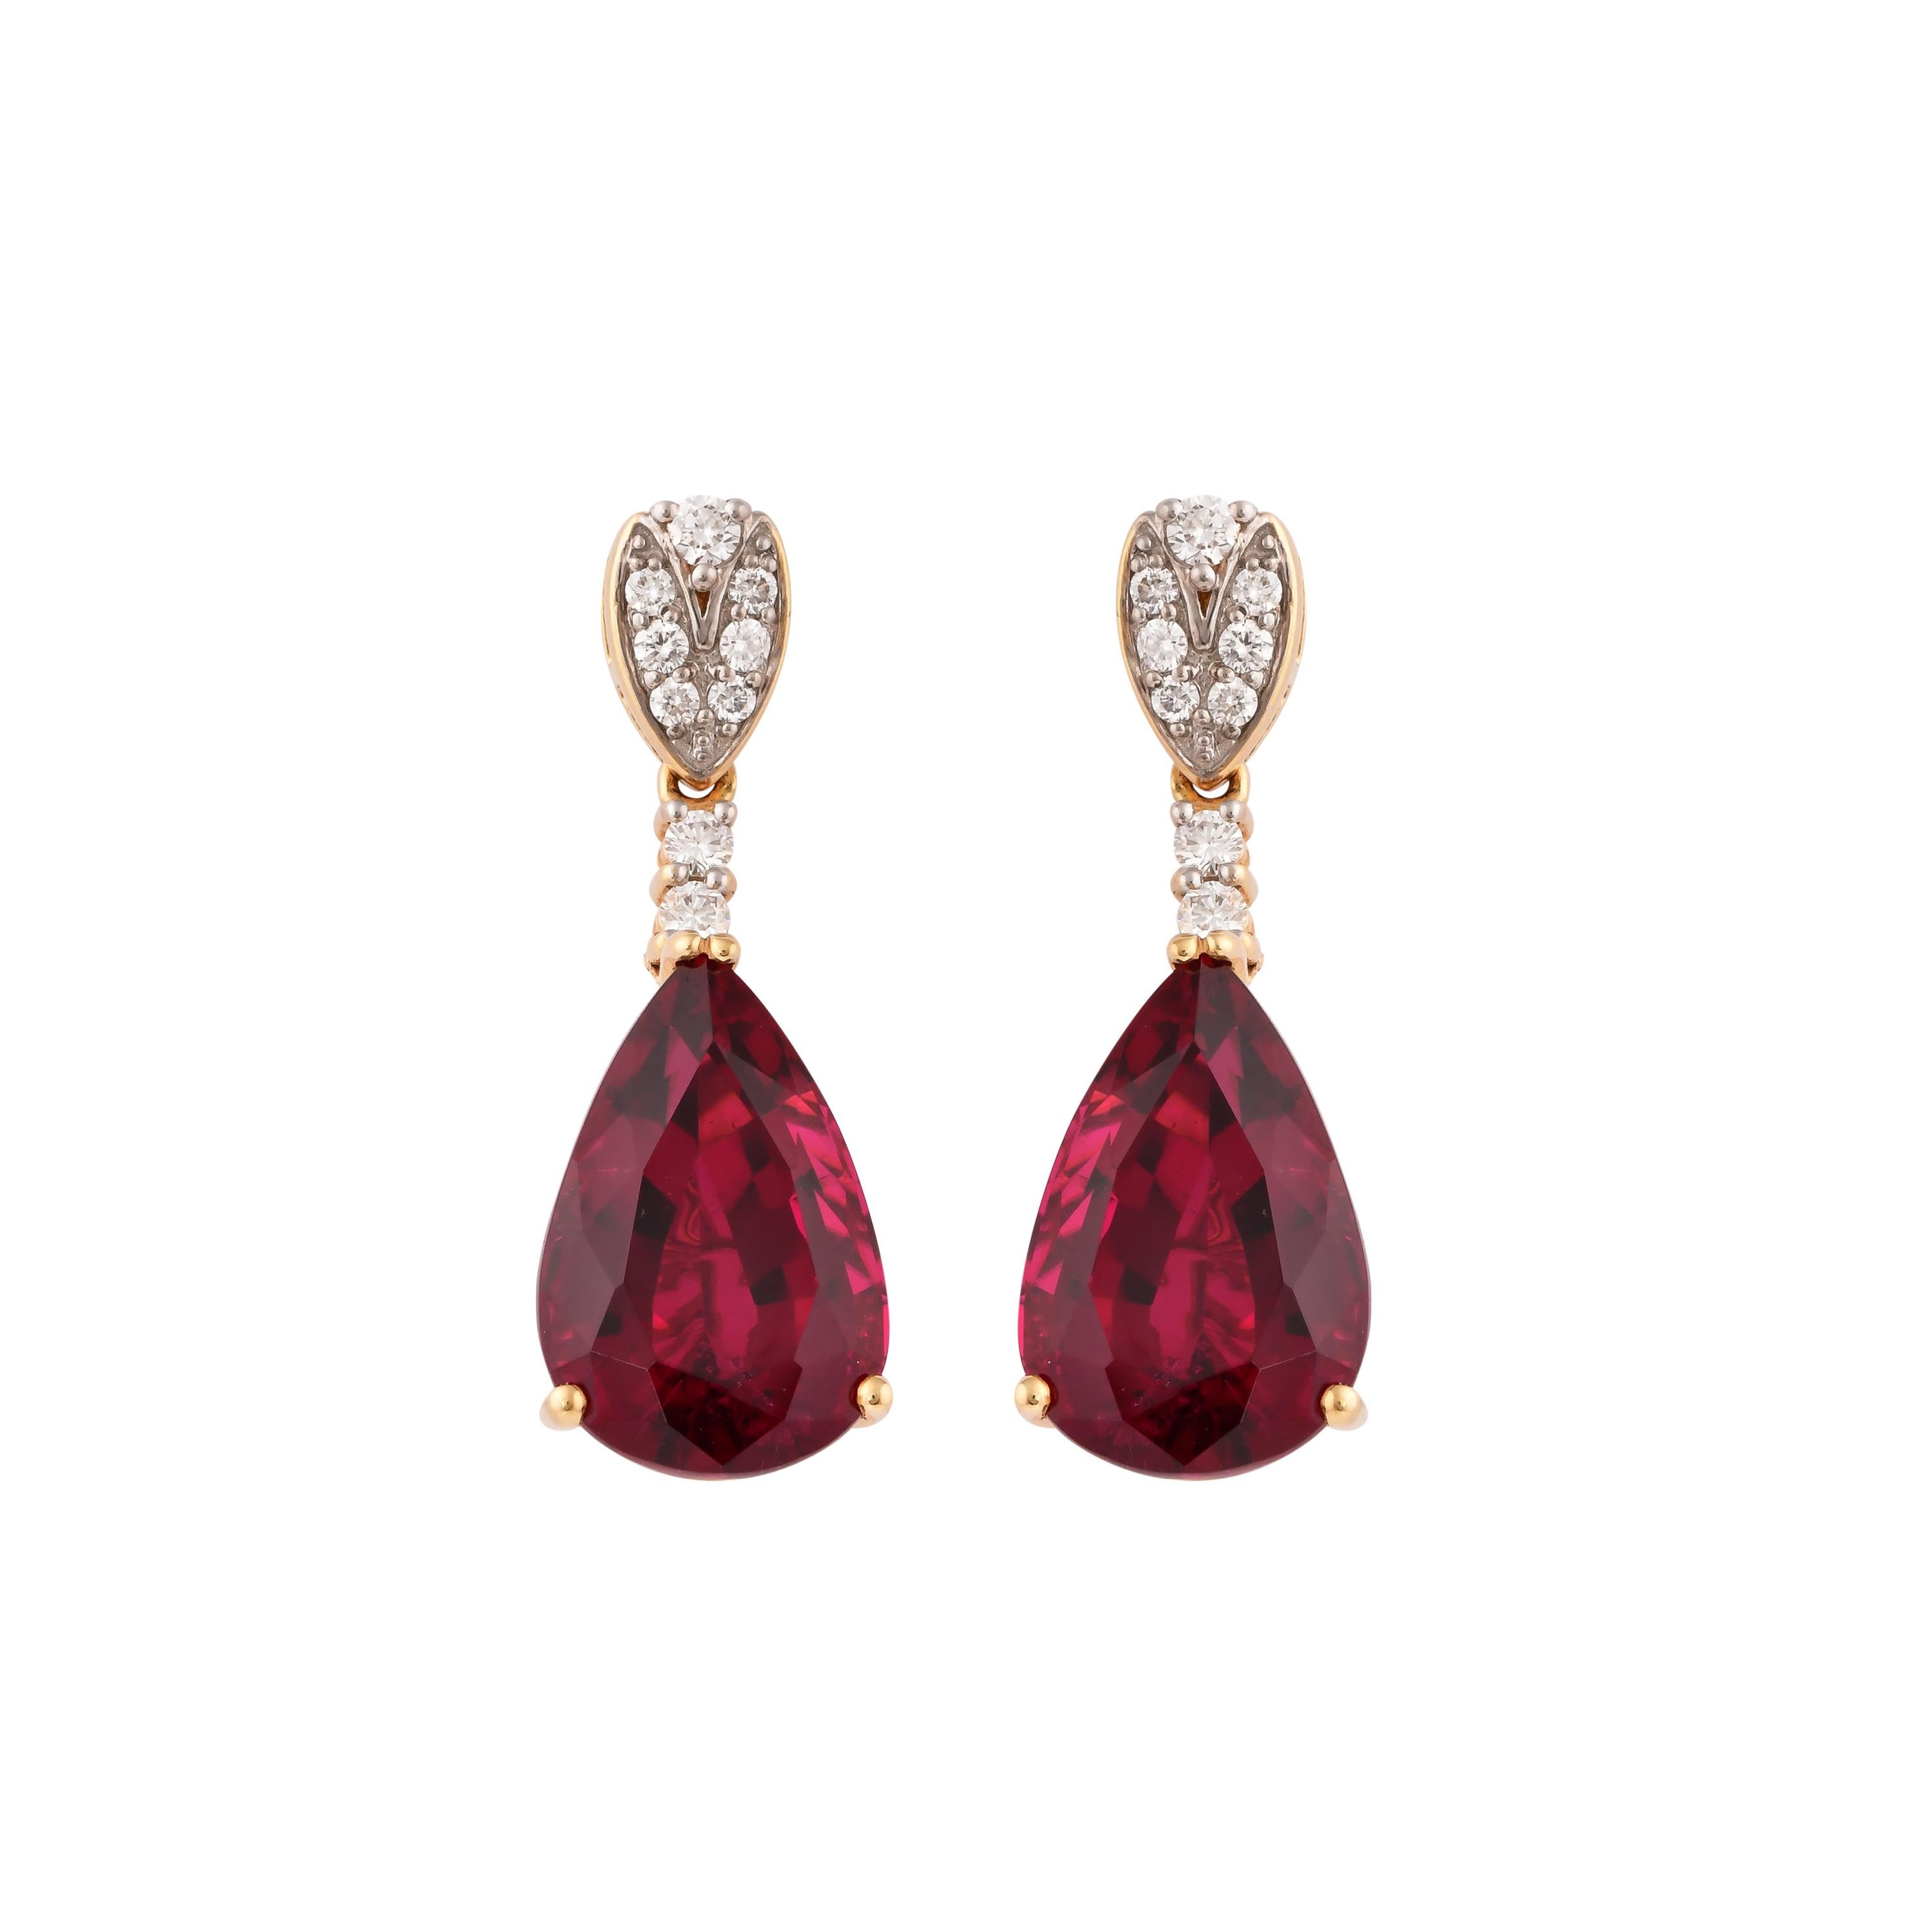 Contemporary 20.94 Carat Rubellite Tourmaline Earring with Diamond in 18 Karat Yellow Gold For Sale